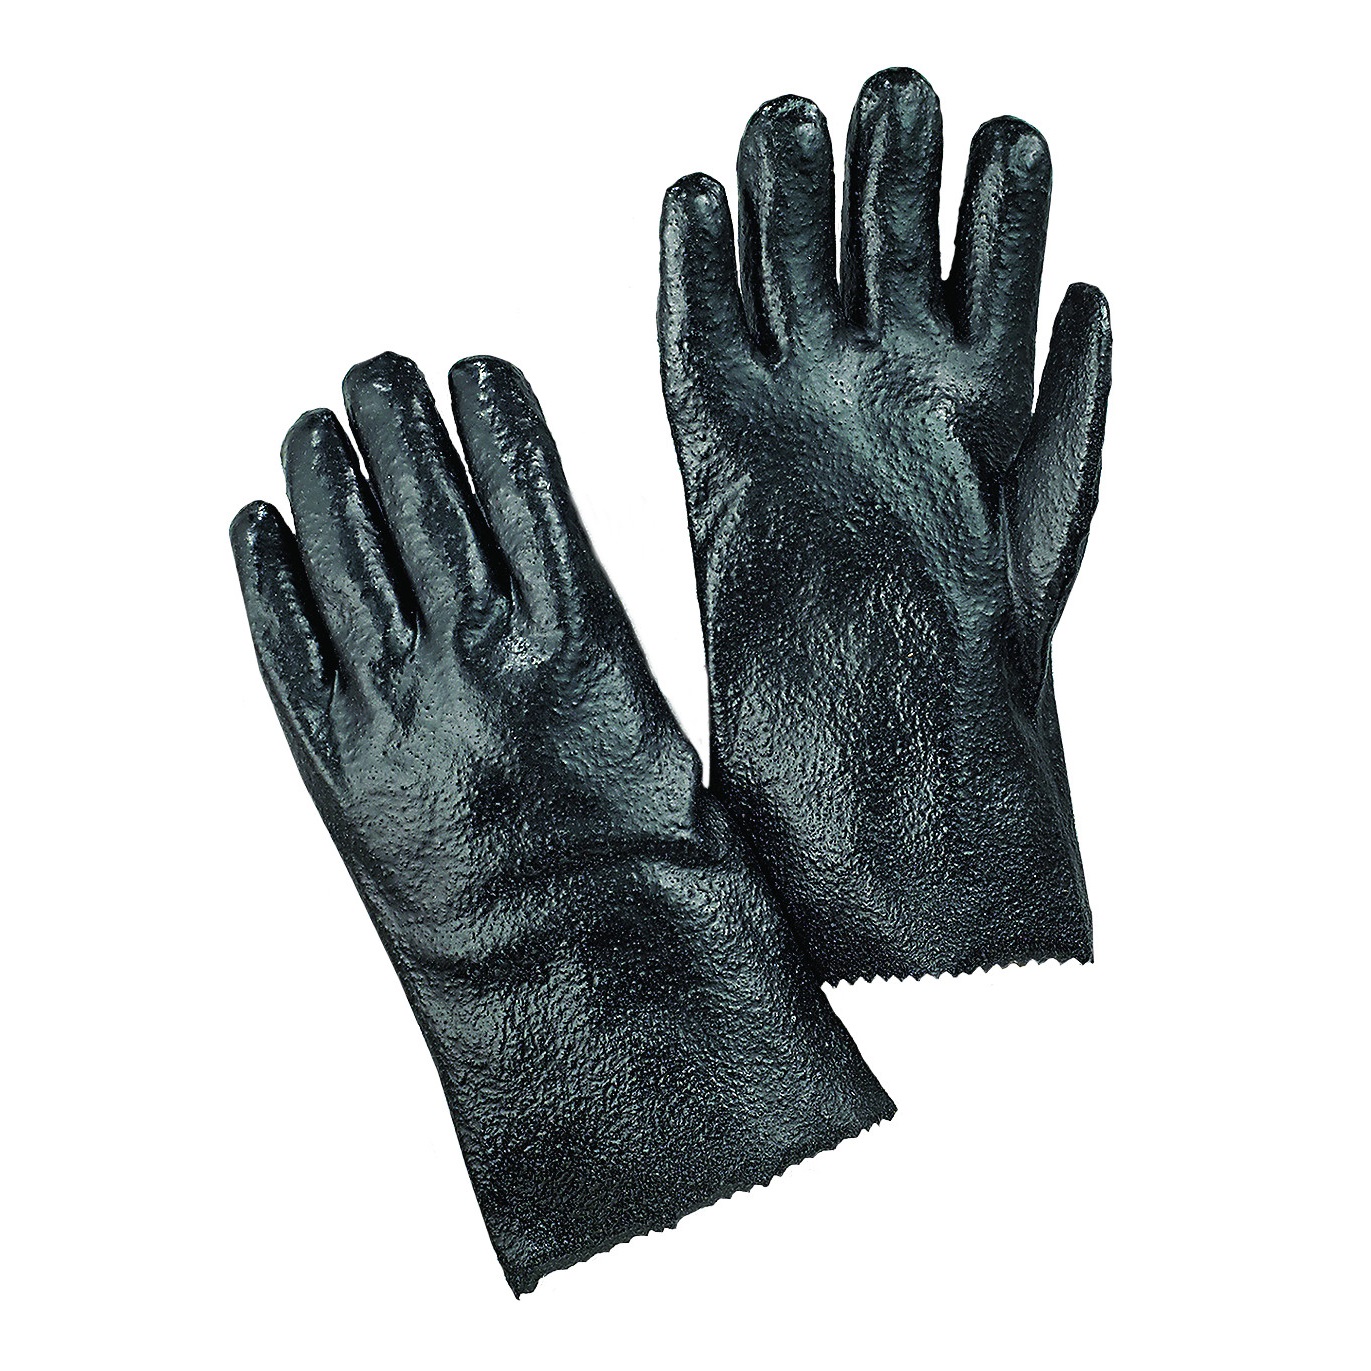 PVC Gloves with Rough Finish, 12 Inch